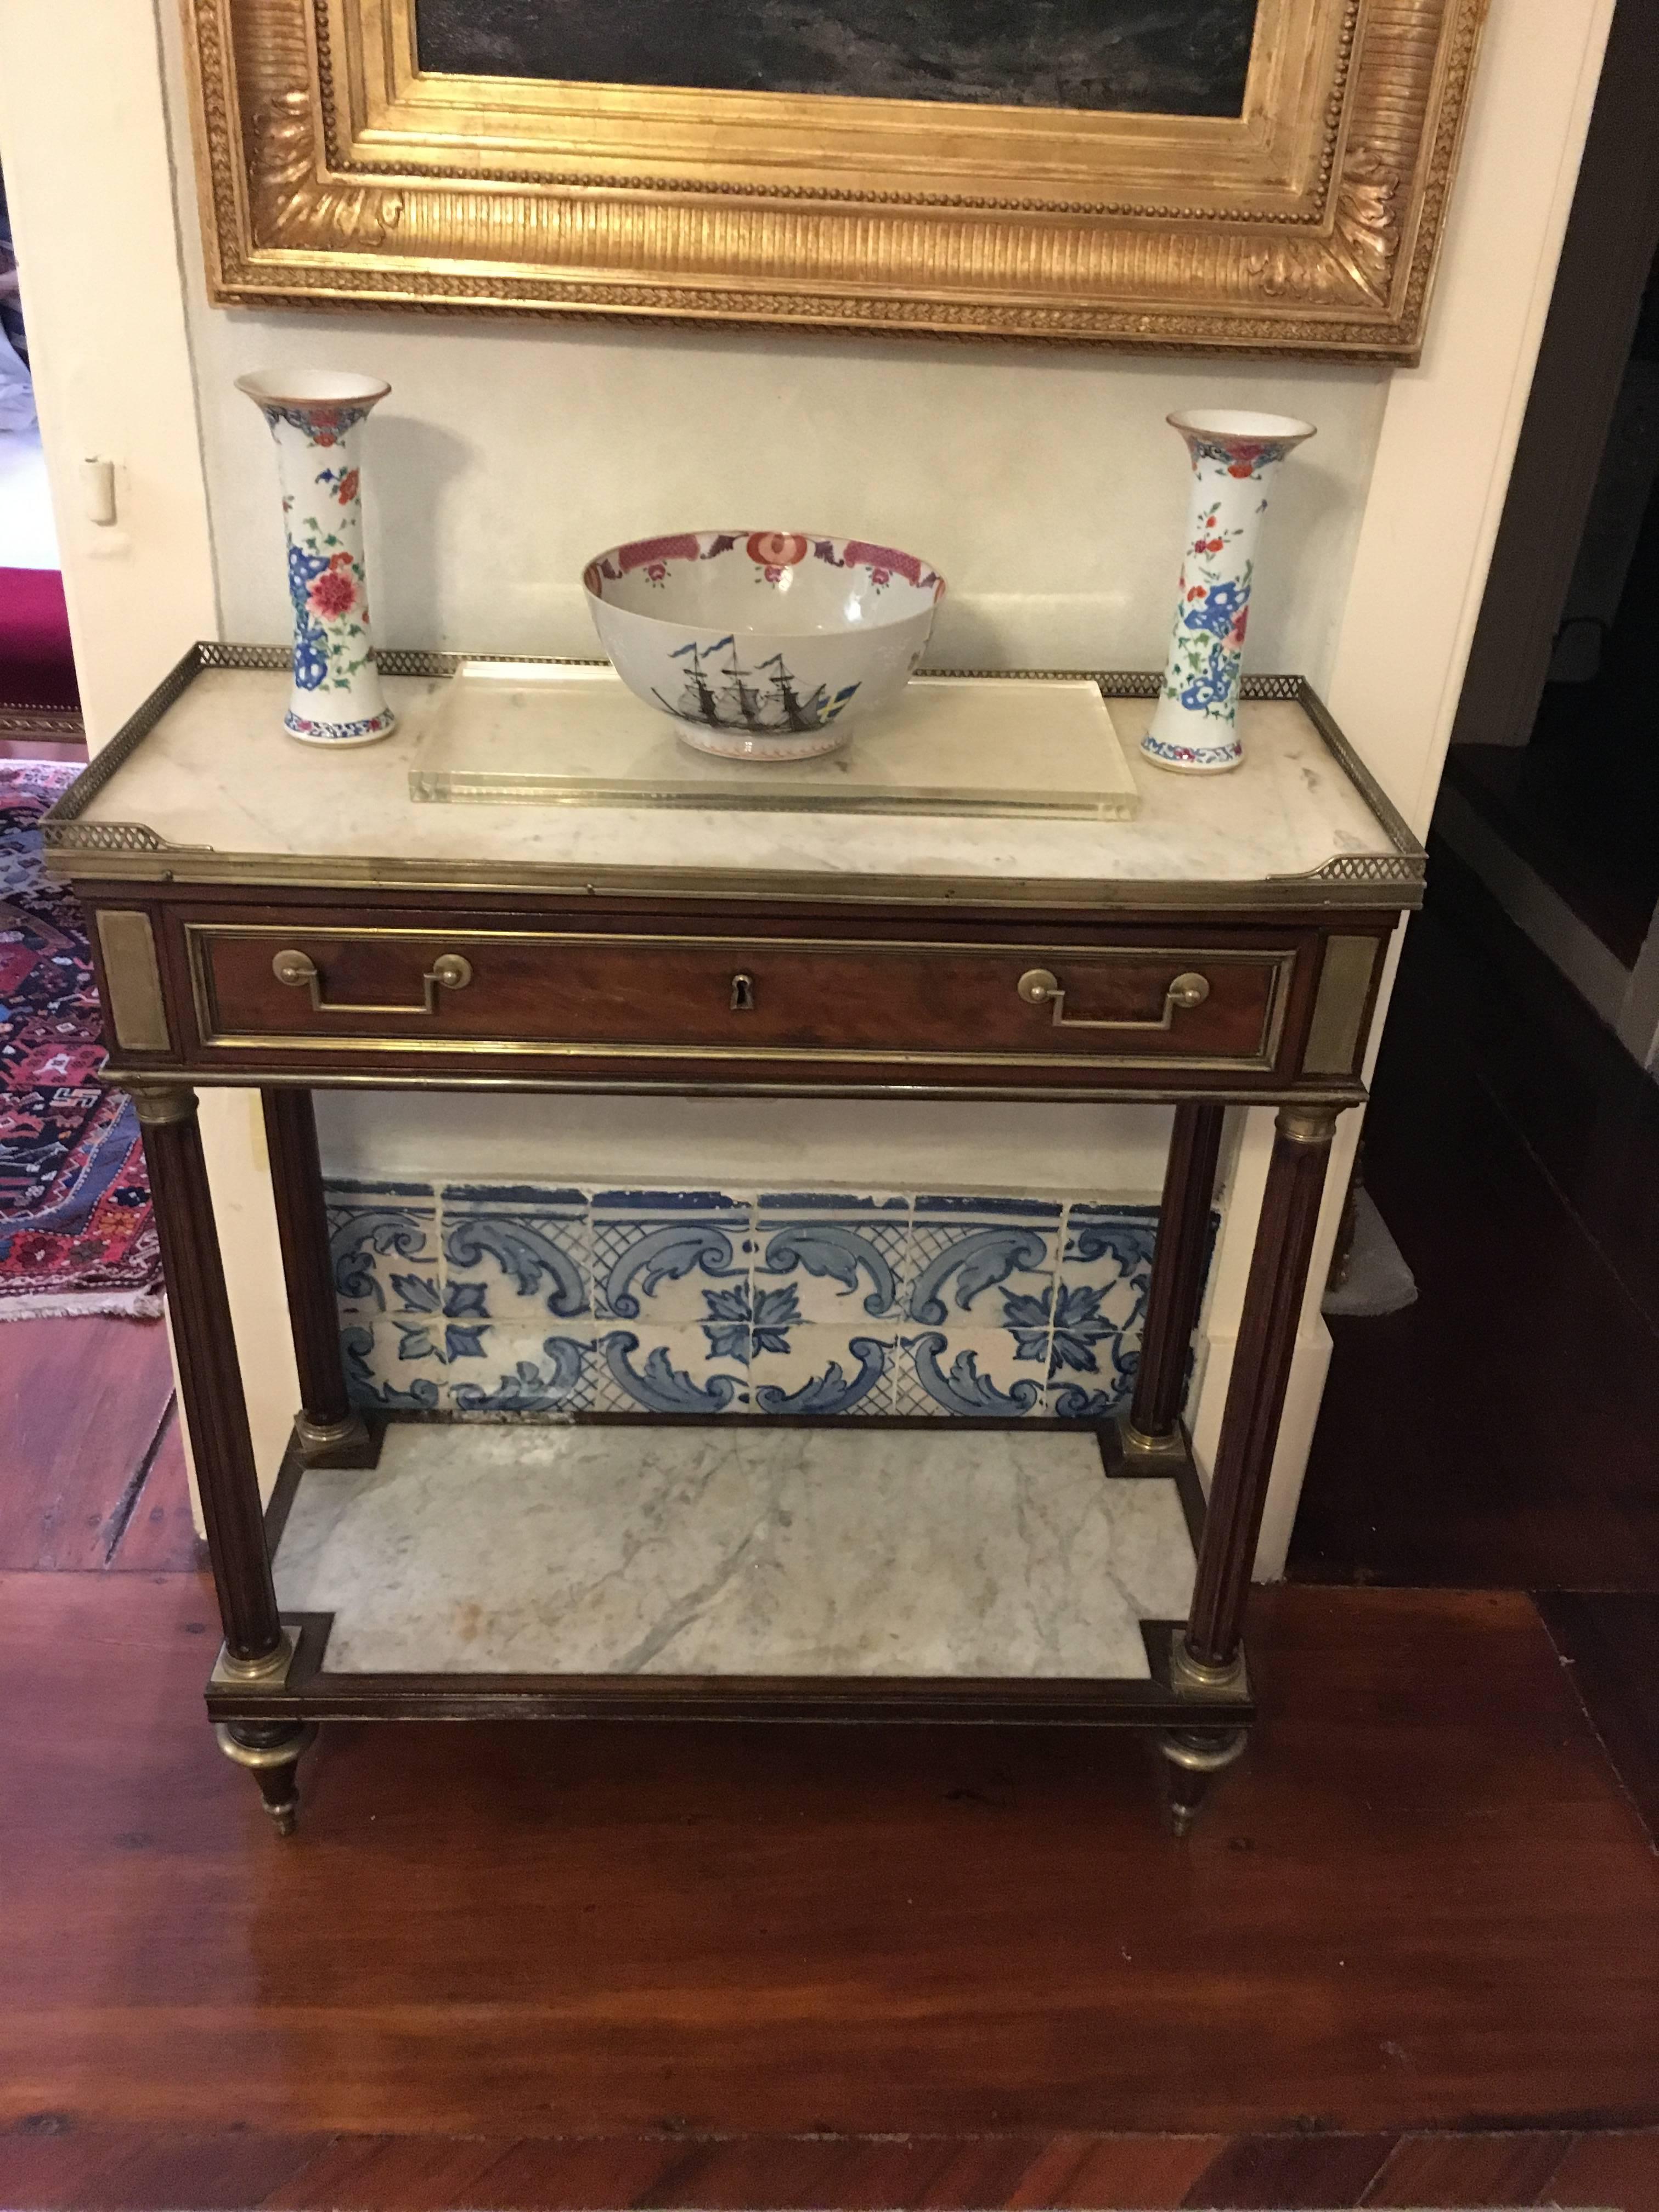 For sale on 1stdibs  an early 19th century Louis XVI mahogany marble topped and bronze mounted console table. The console has a bottom shelf also with white marble top. Being a very narrow piece it could be a great console to place on a dinning room